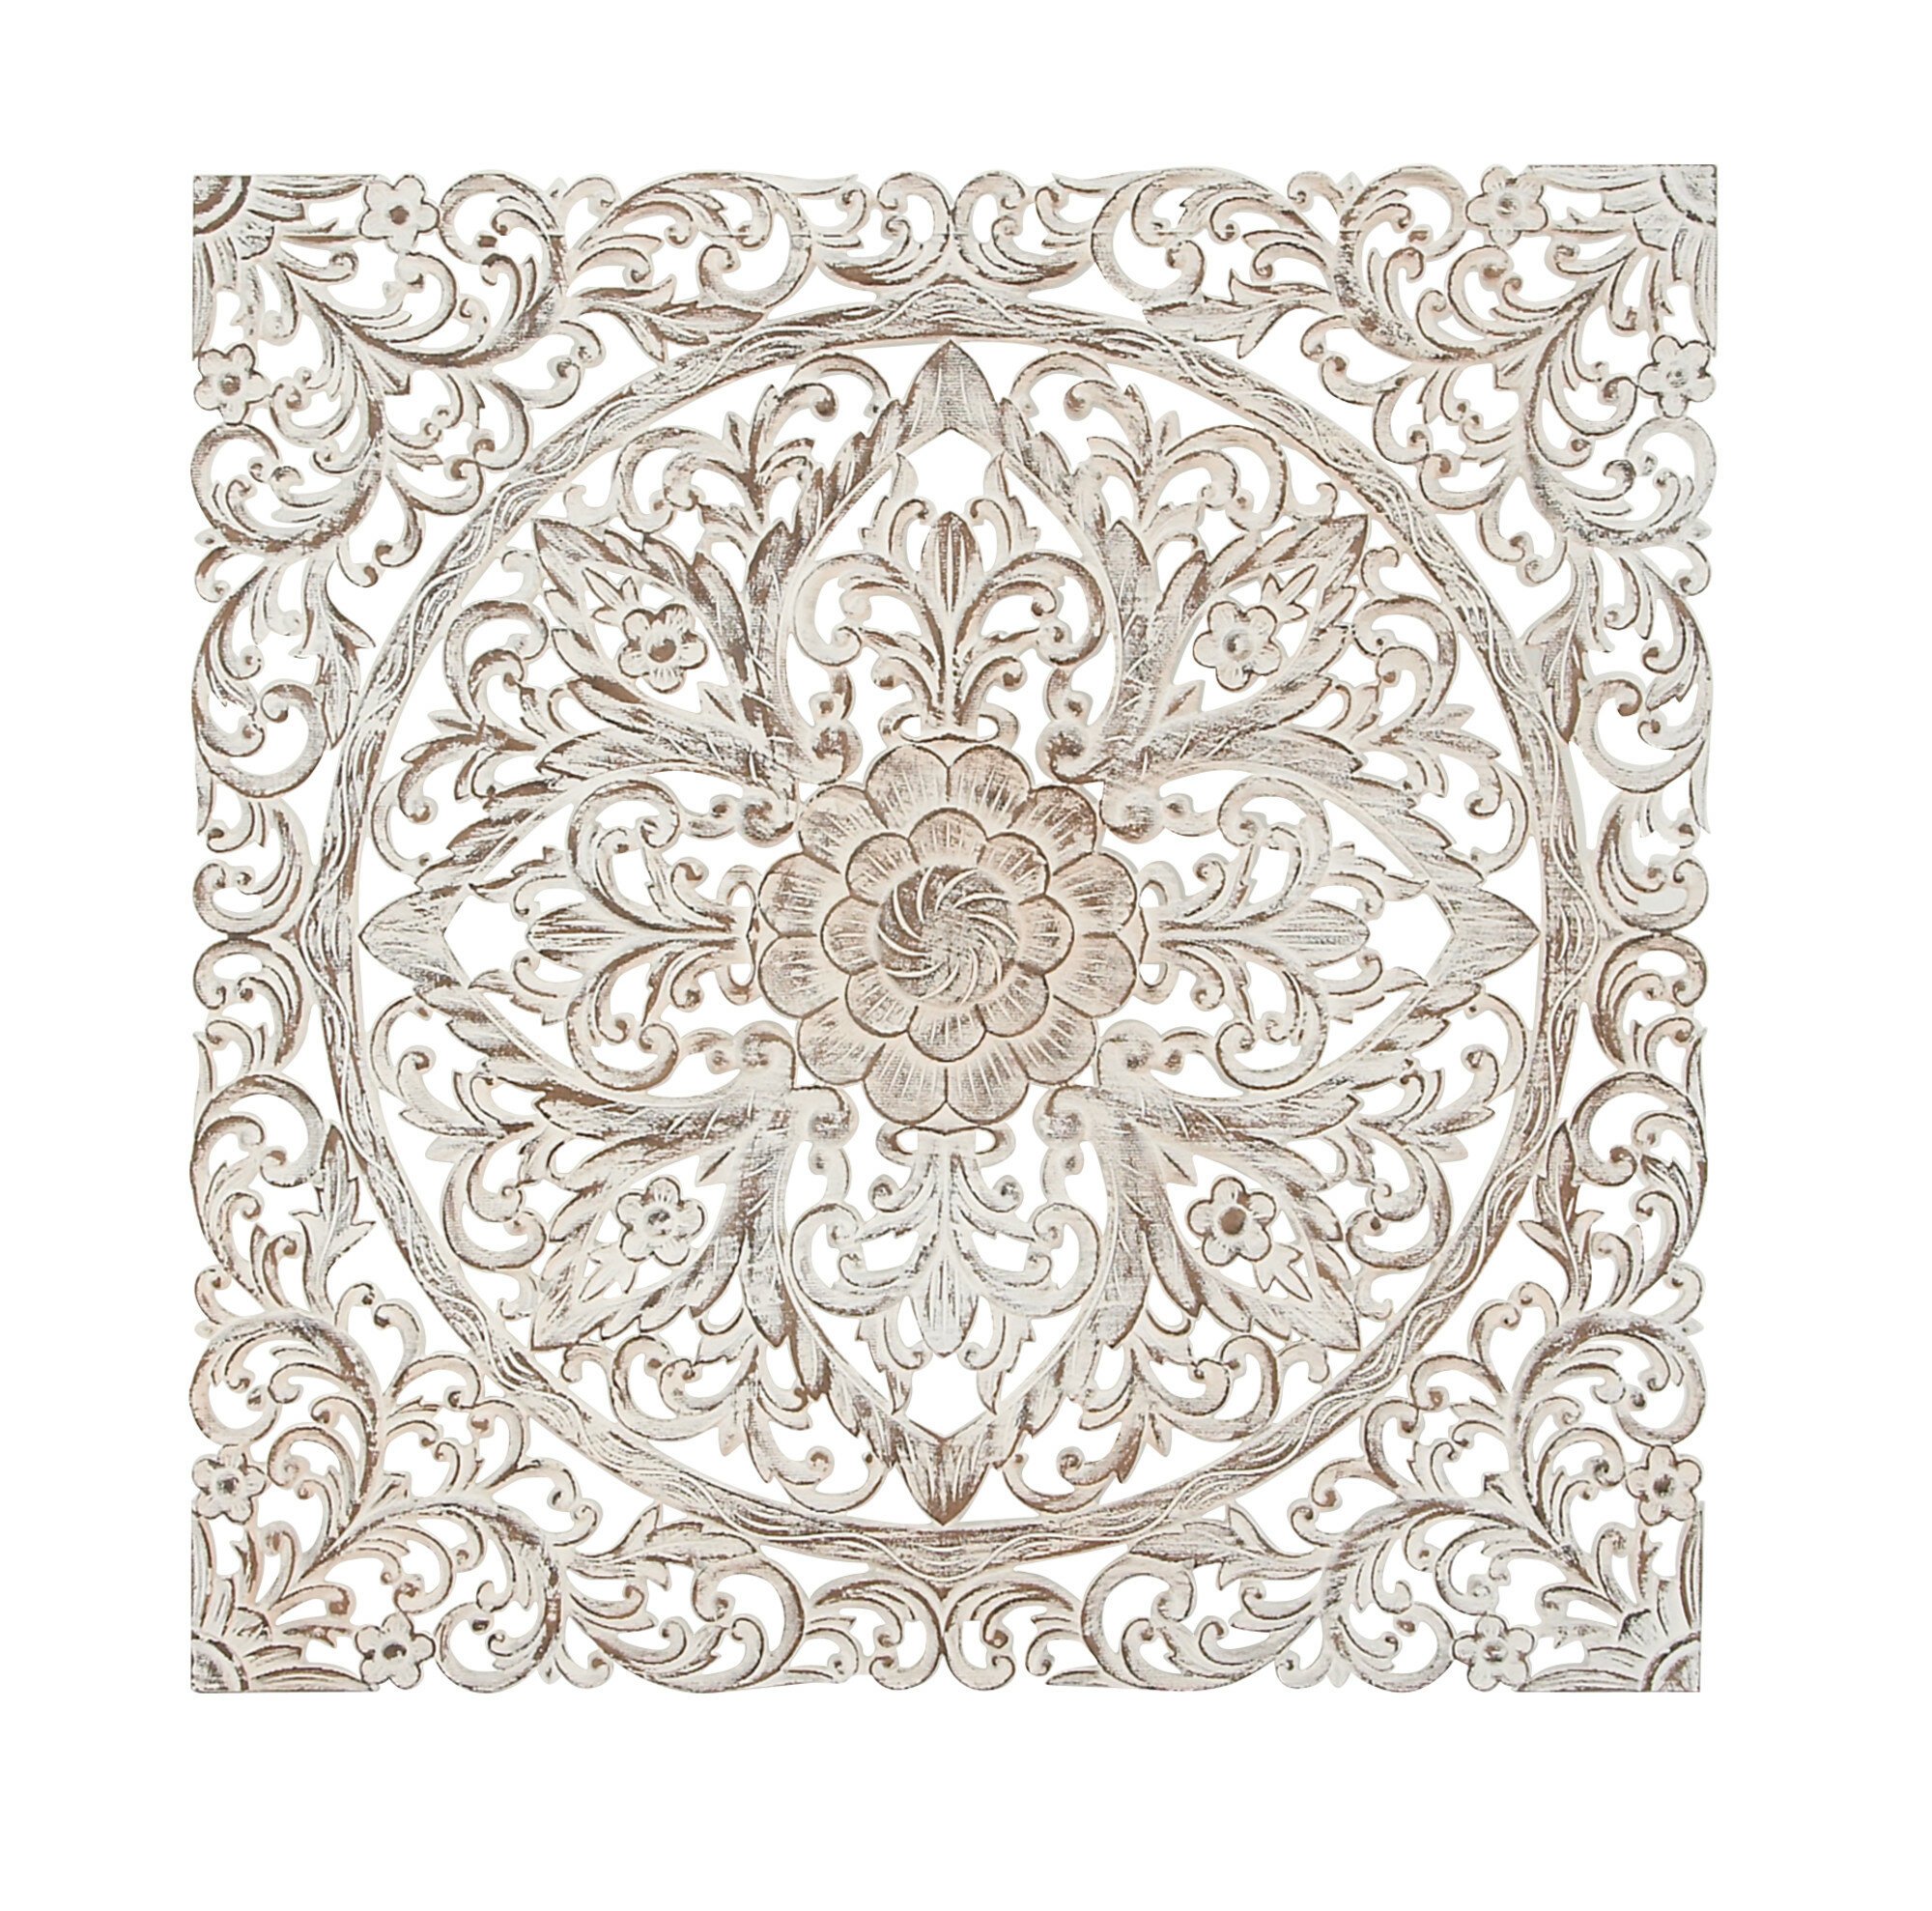 Bungalow Rose Traditional Carved Floral Medallion Wall Decor Reviews Wayfair